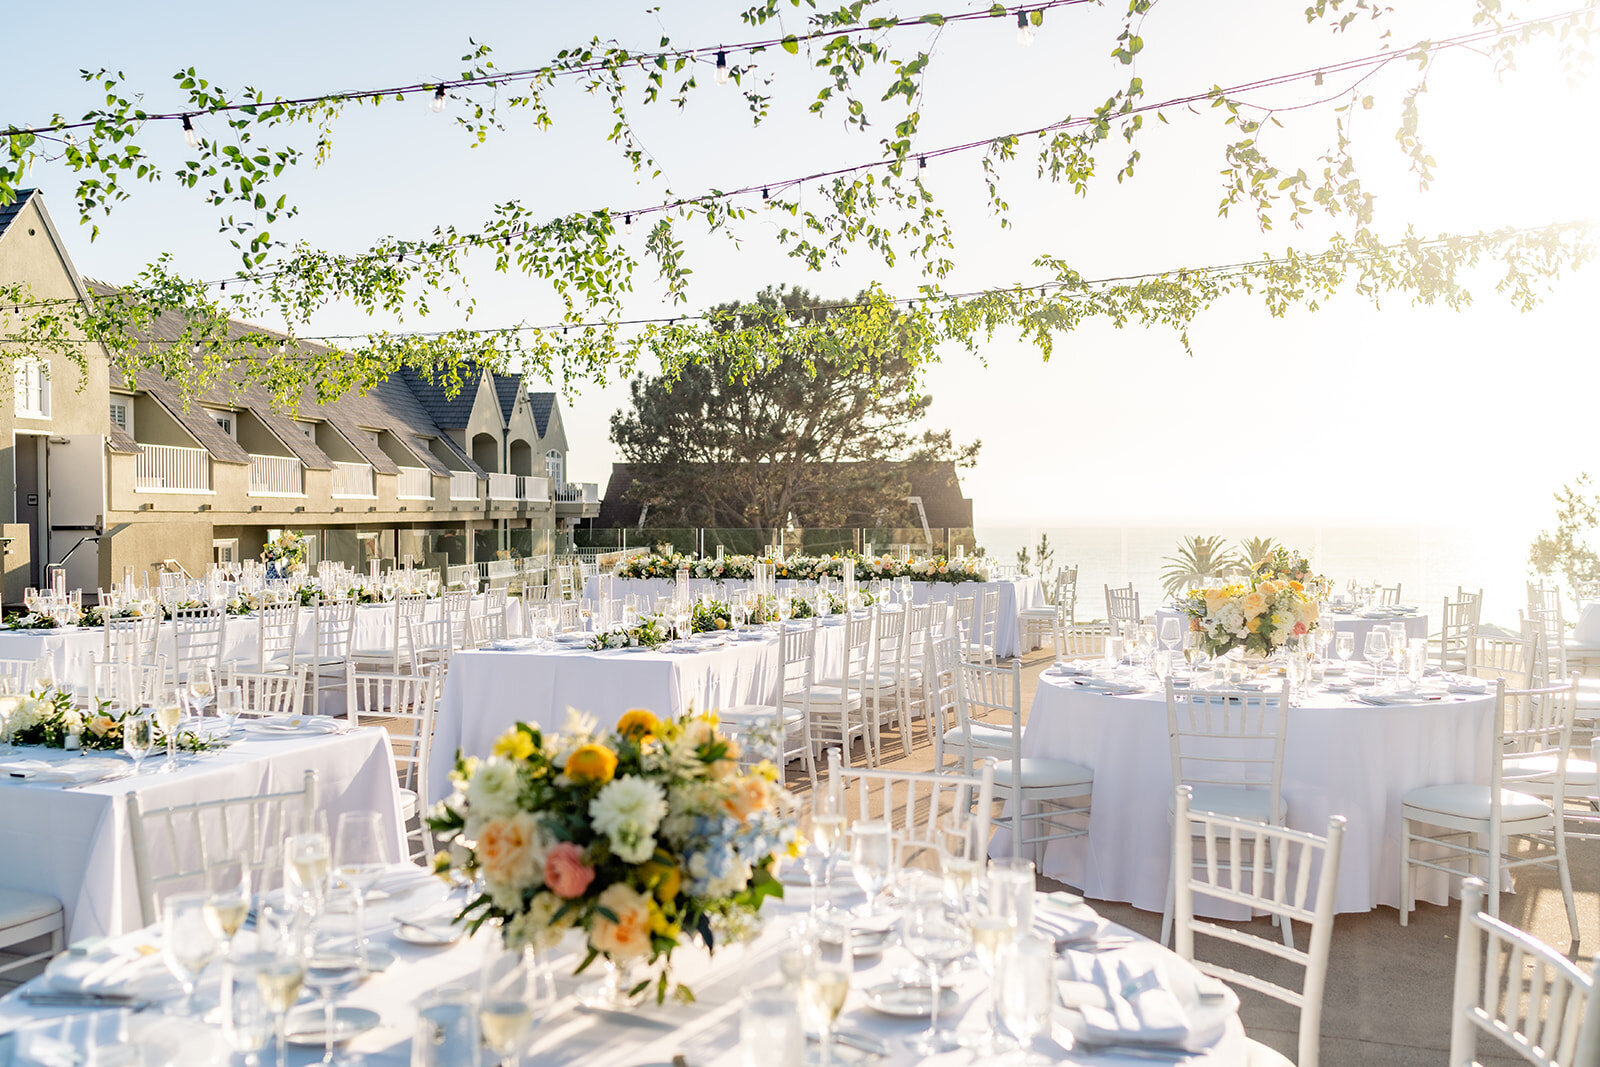 A wide shot of an outdoor reception decoration with white linen tables, colorful floral center pieces, and greenery hanging above